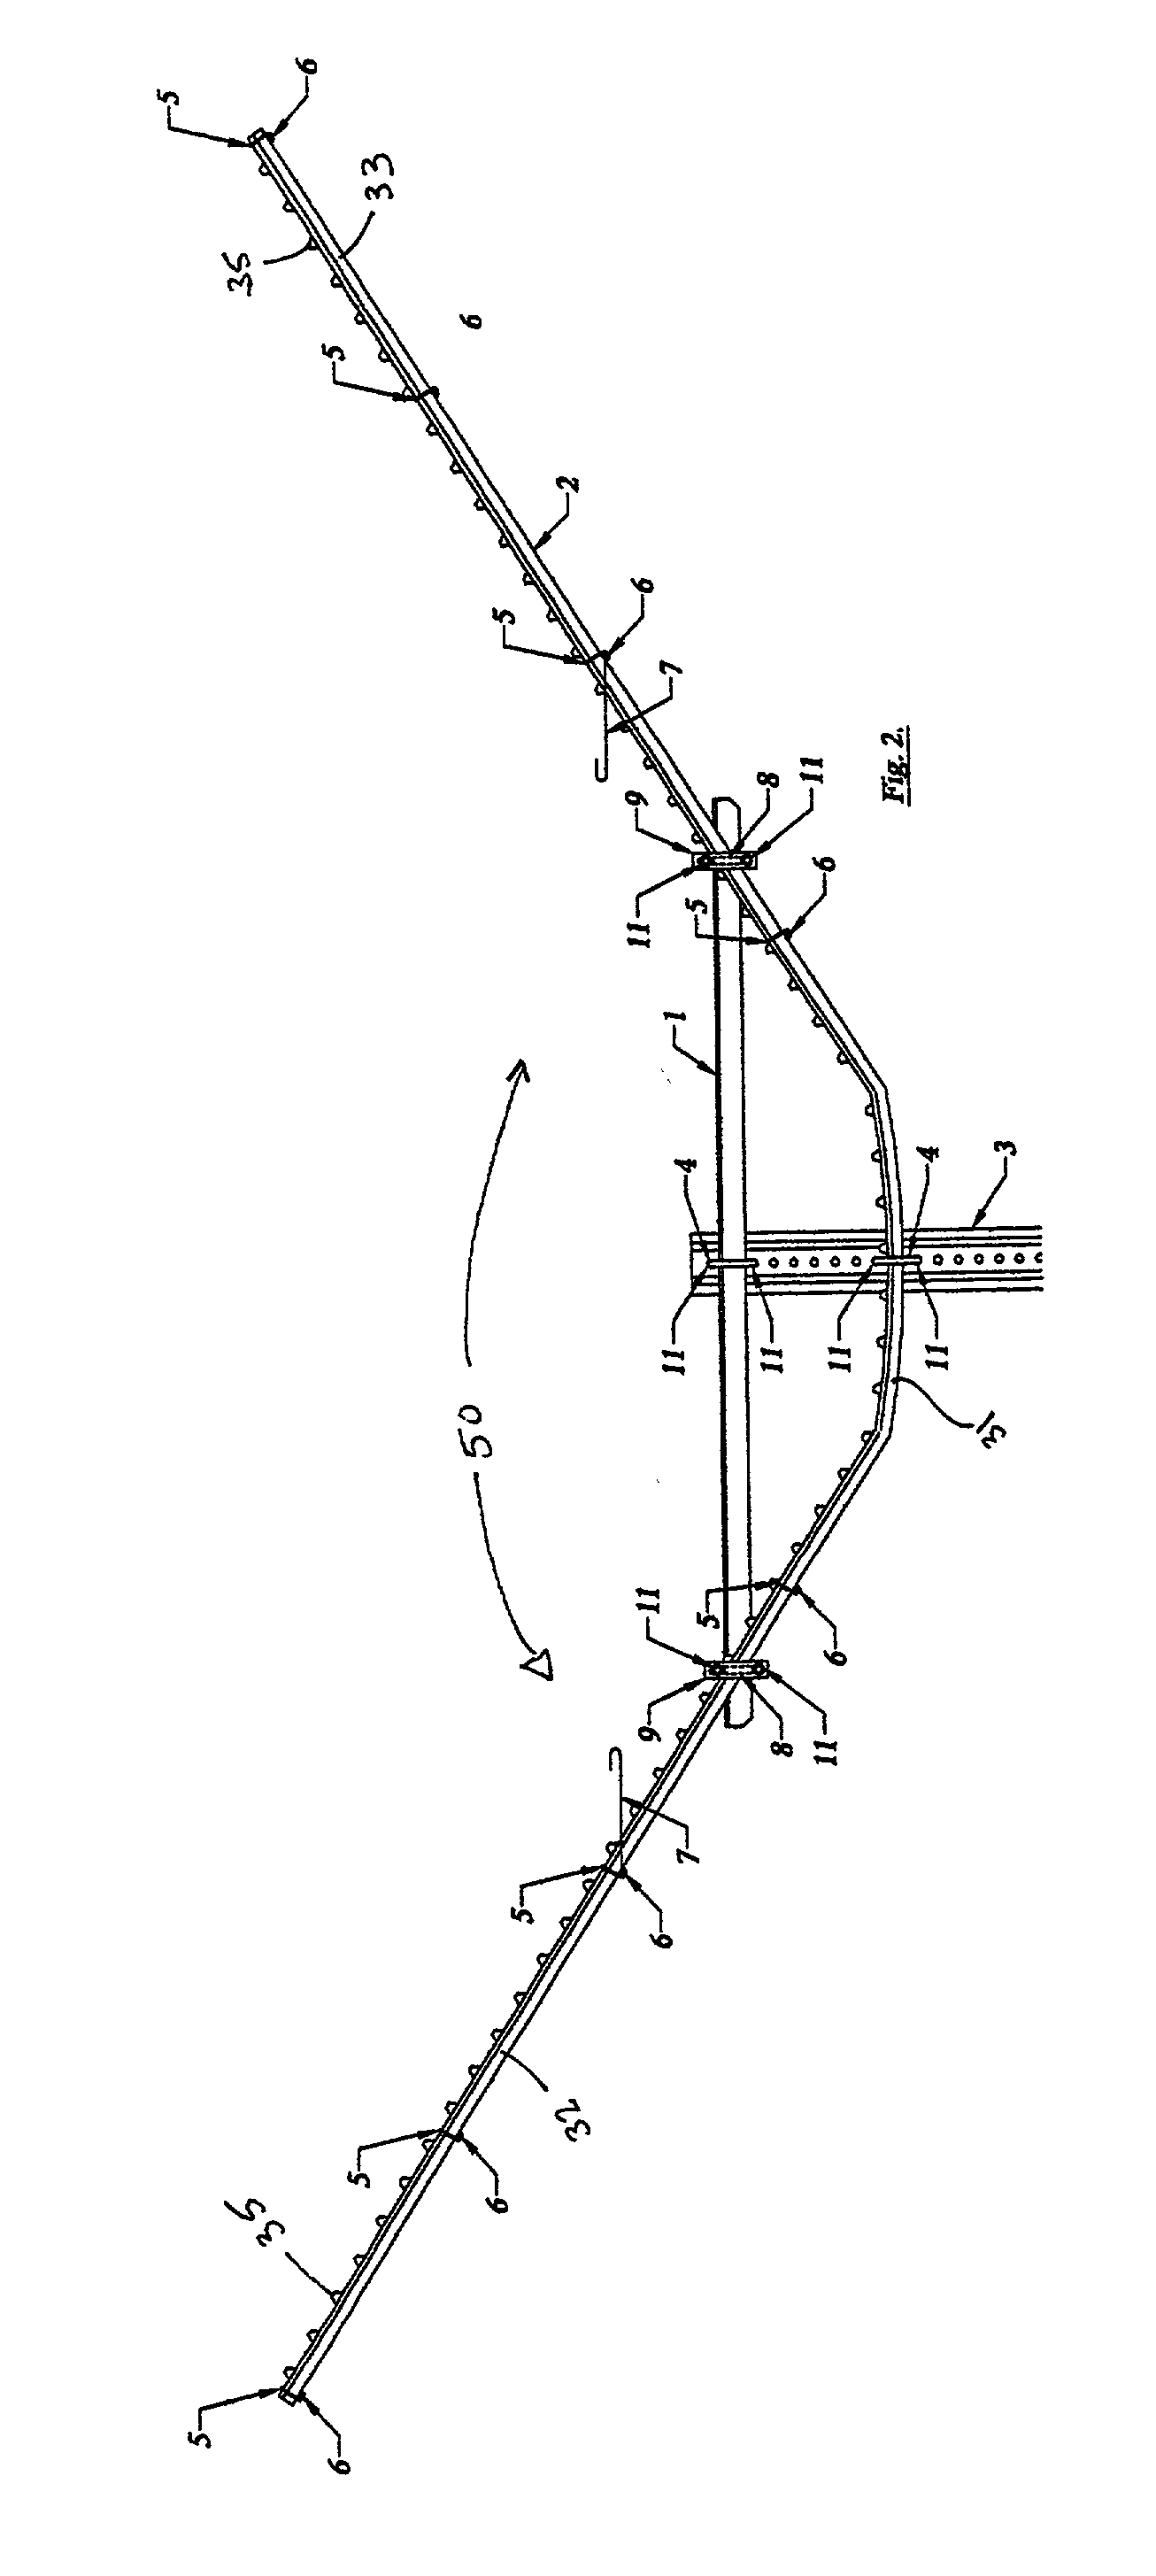 Support structure for trellis system